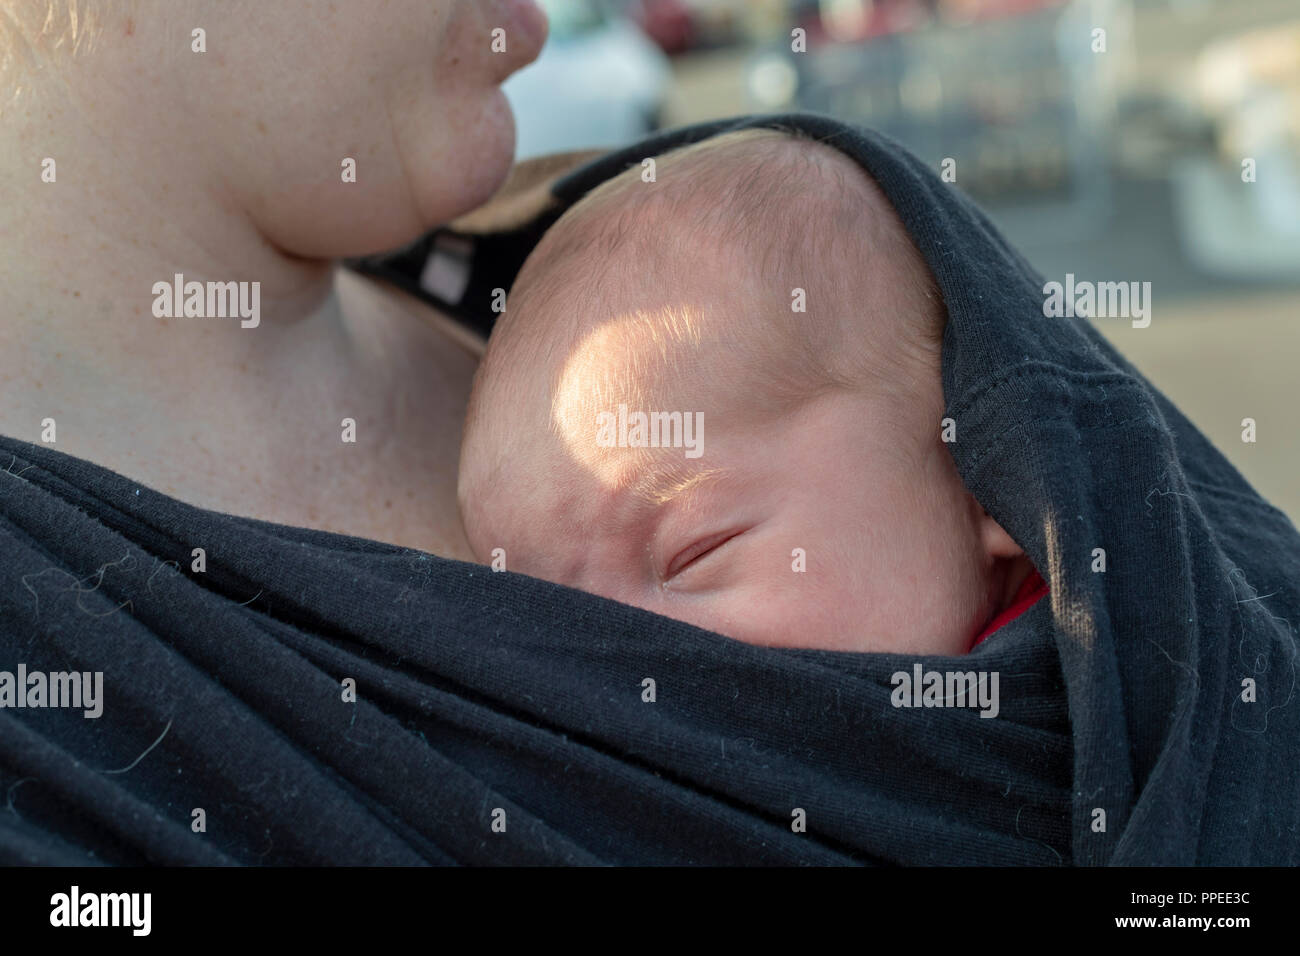 Wheat Ridge, Colorado - A young mother with her sleeping infant. Stock Photo